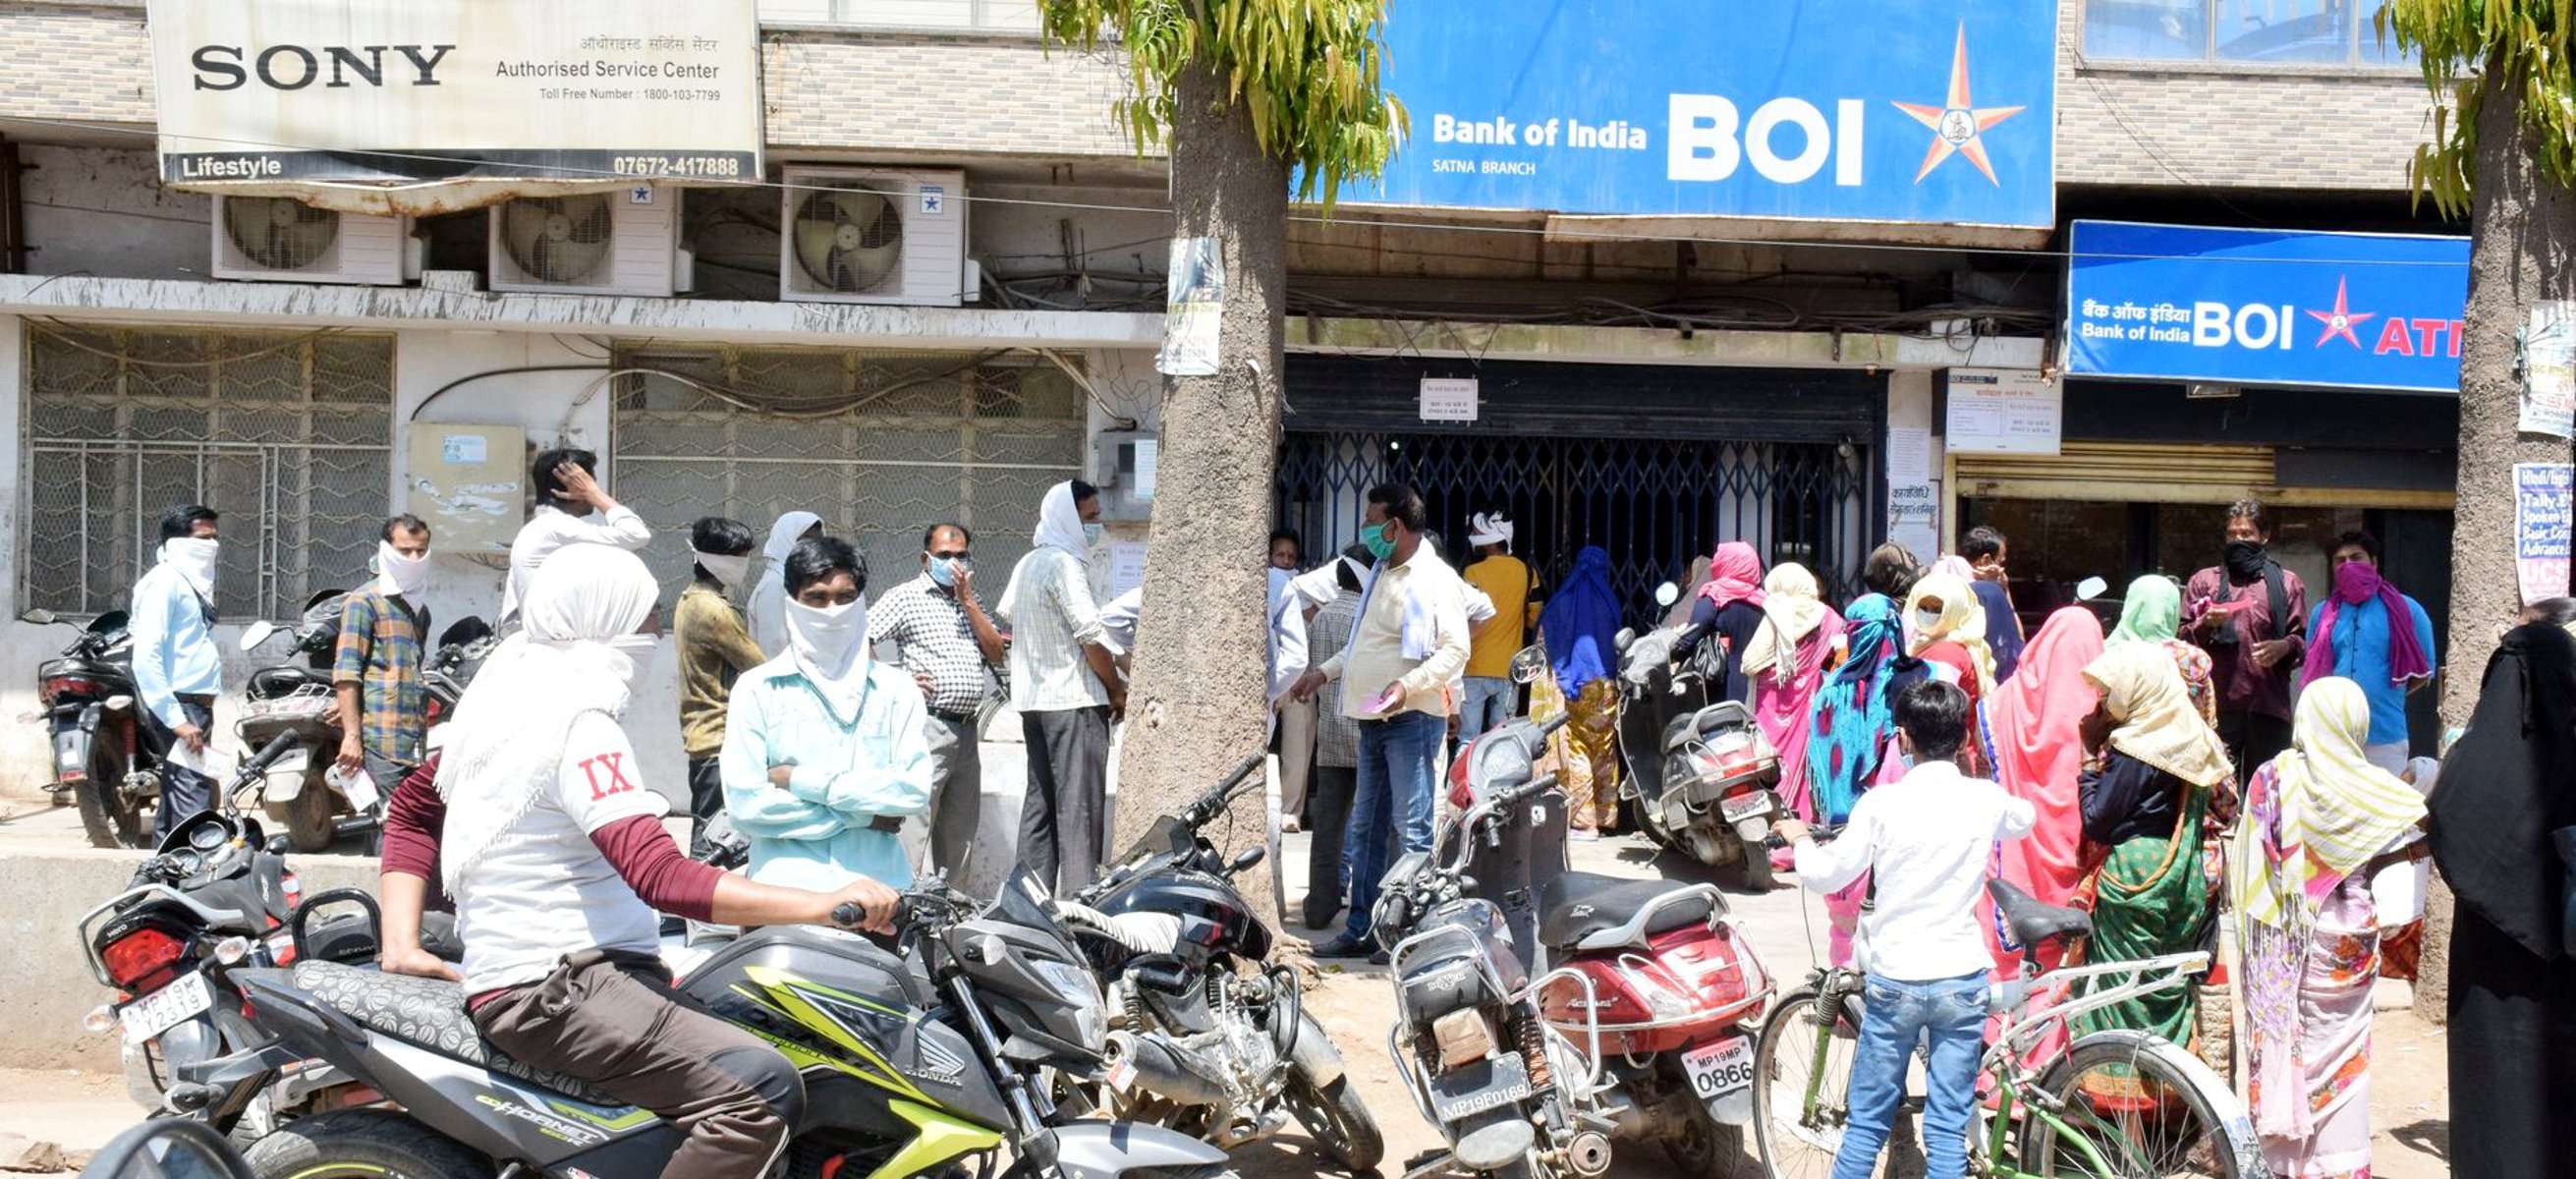 No entry to bank without mask in satna